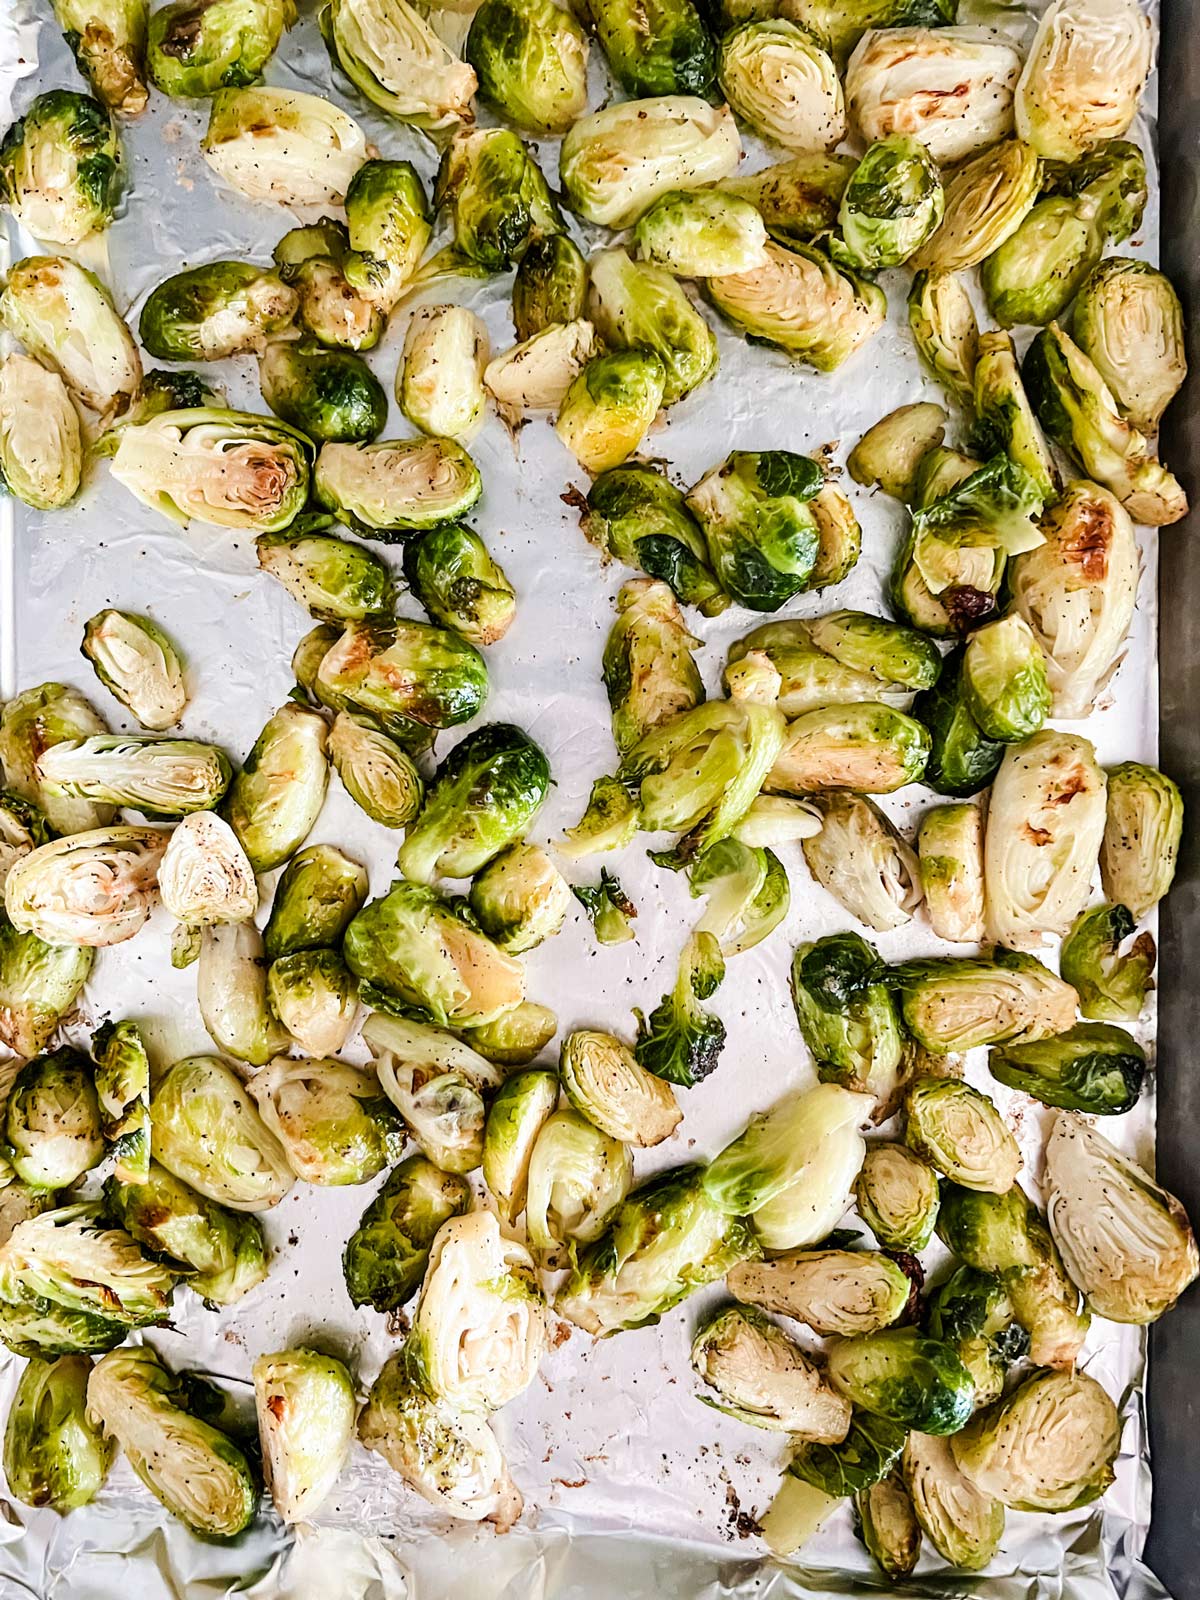 Partially roasted Brussels sprouts on a foil lined baking sheet.